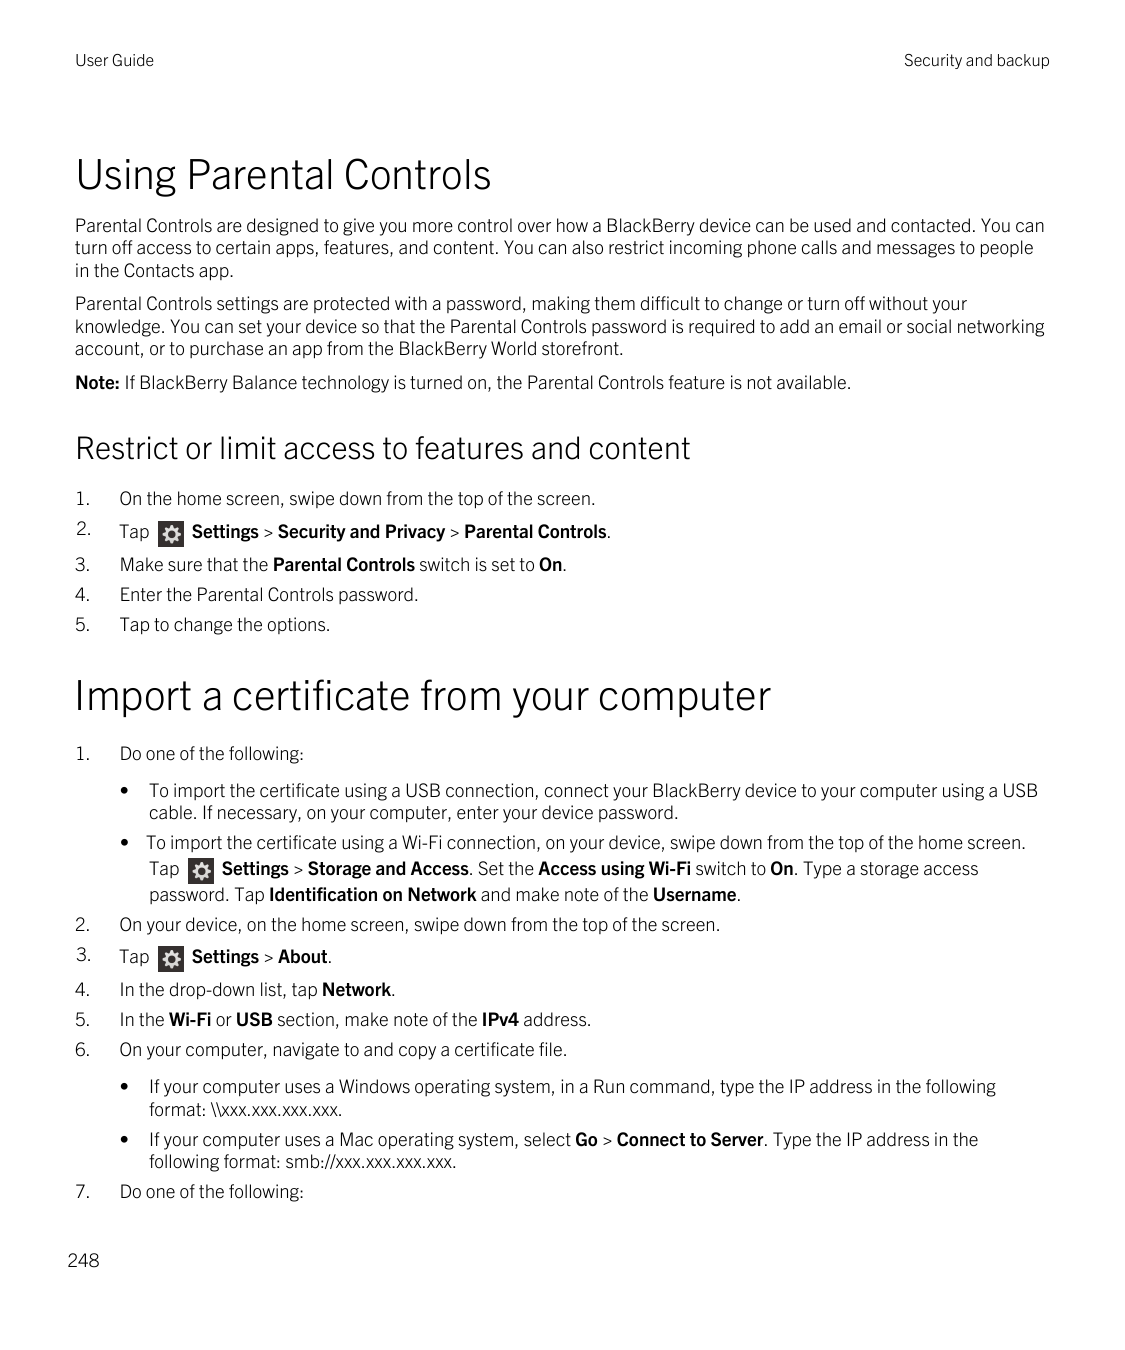 User GuideSecurity and backupUsing Parental ControlsParental Controls are designed to give you more control over how a BlackBerr